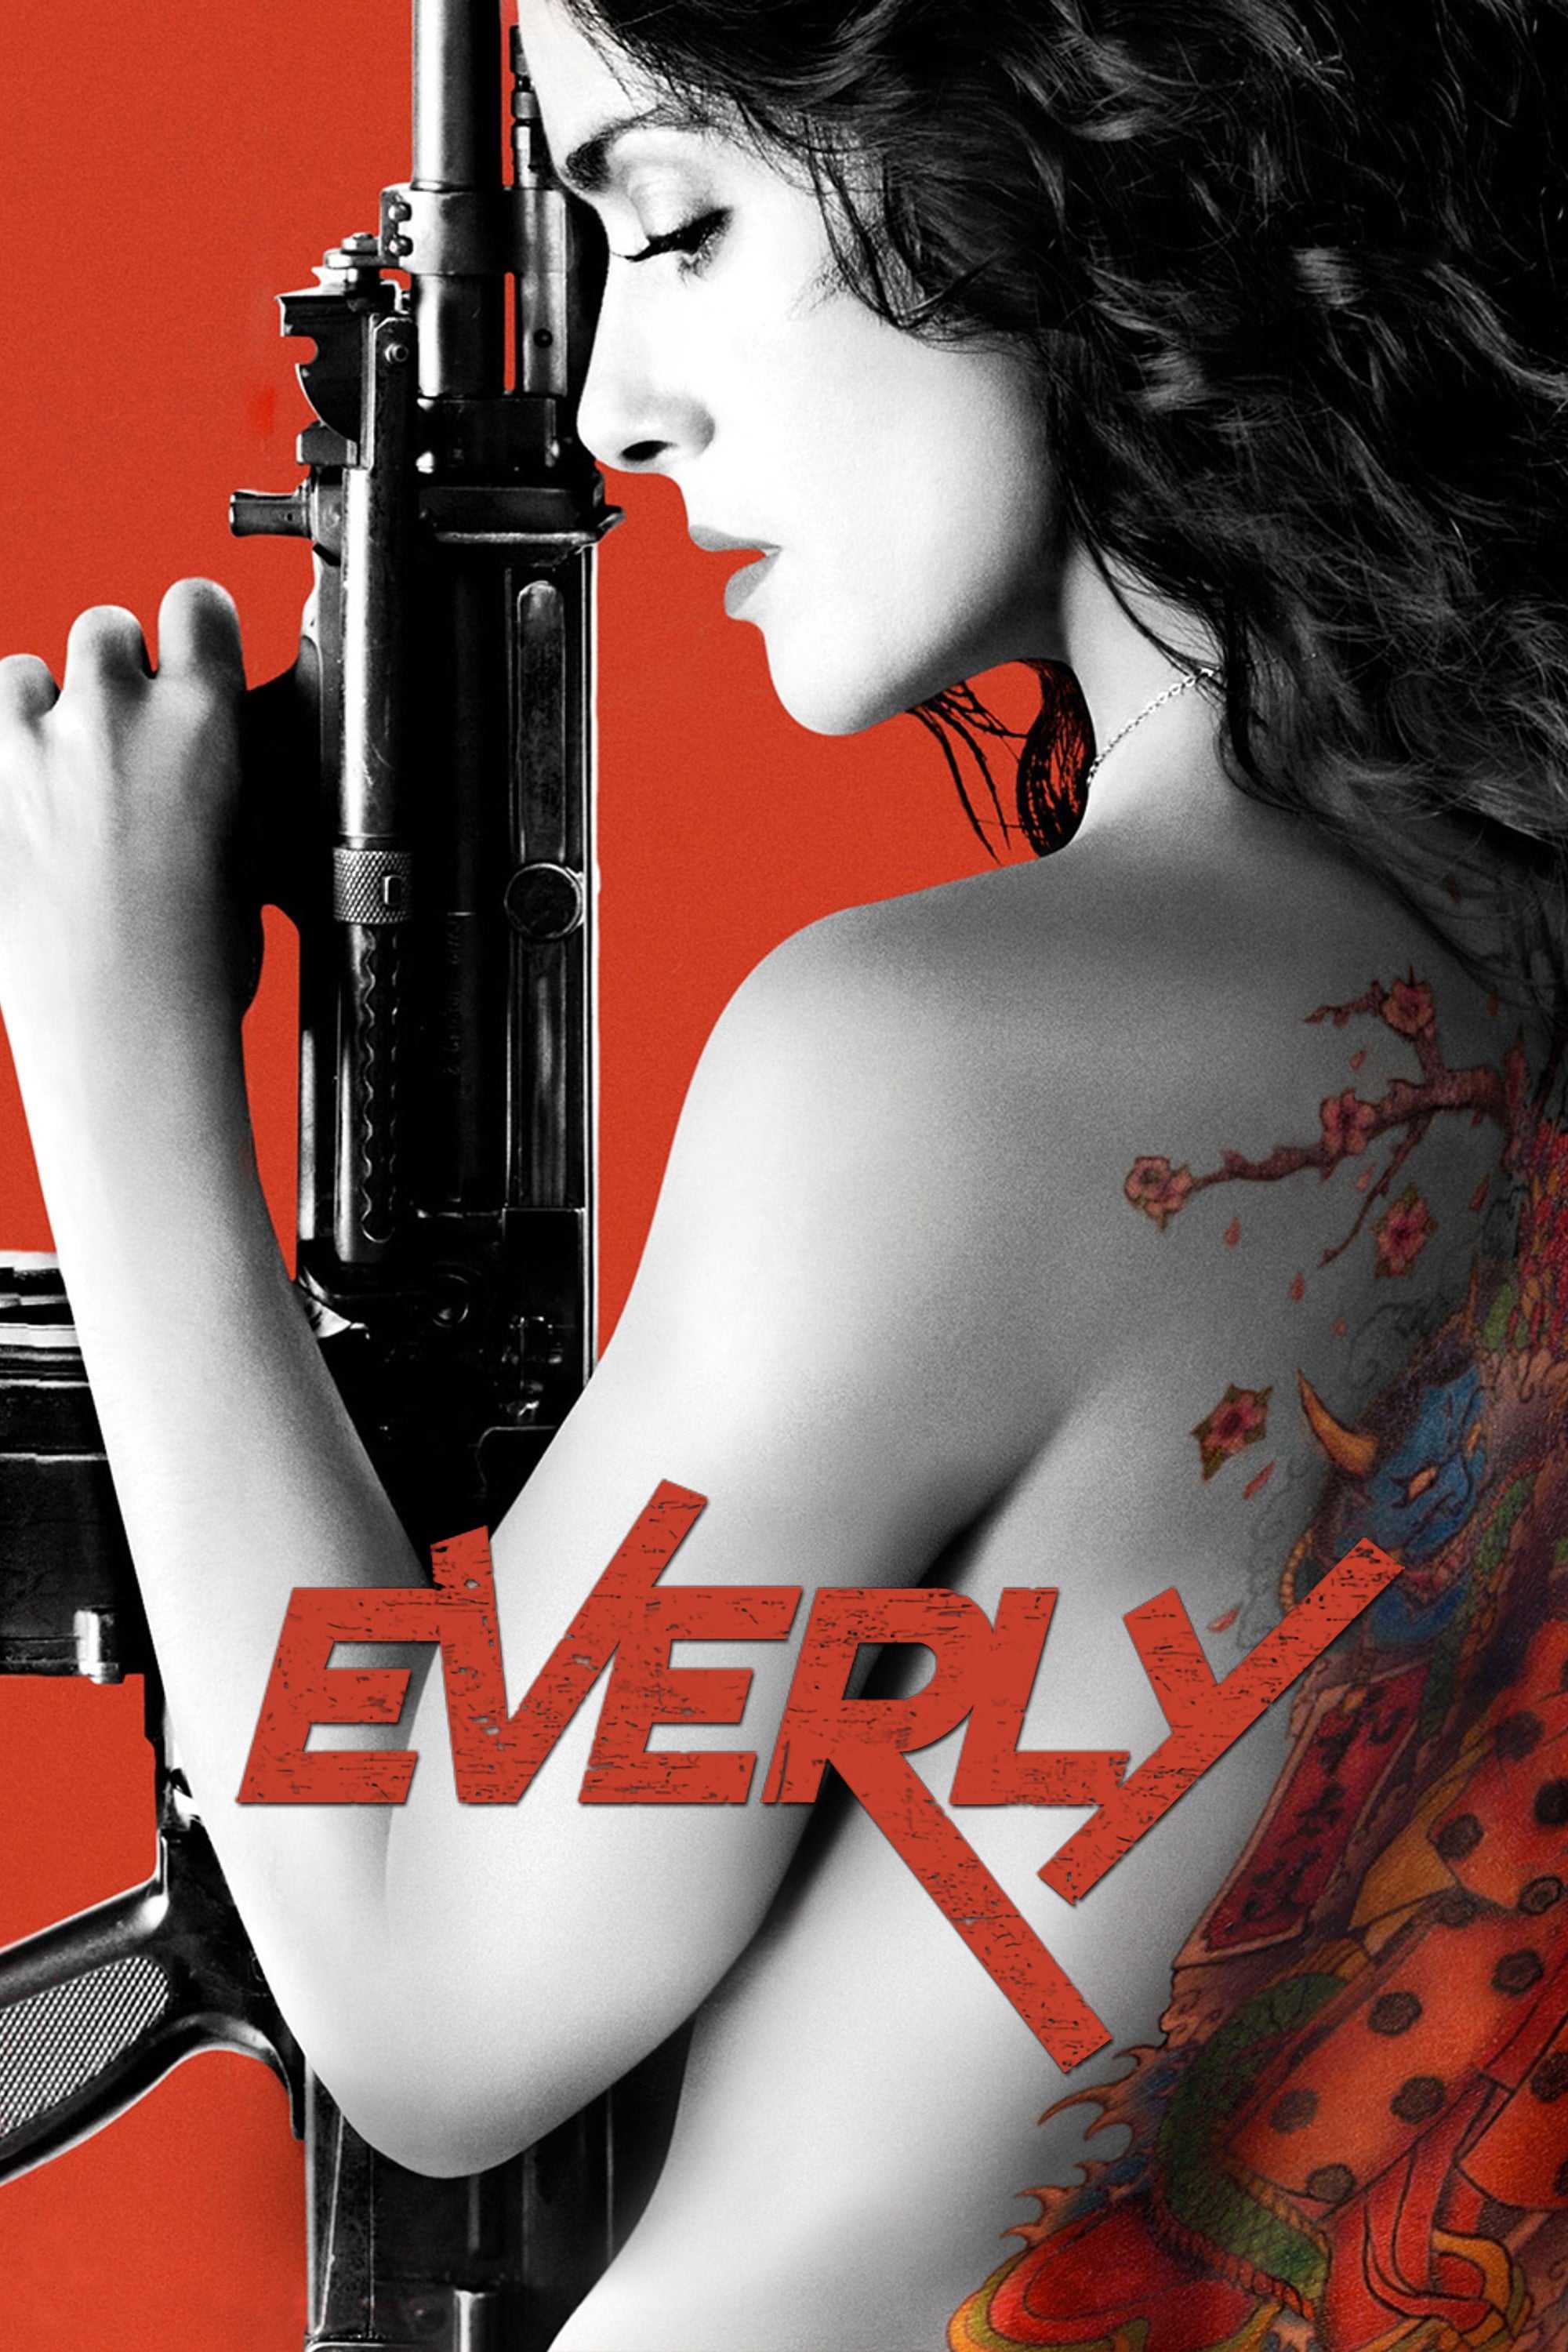 Everly - Everly